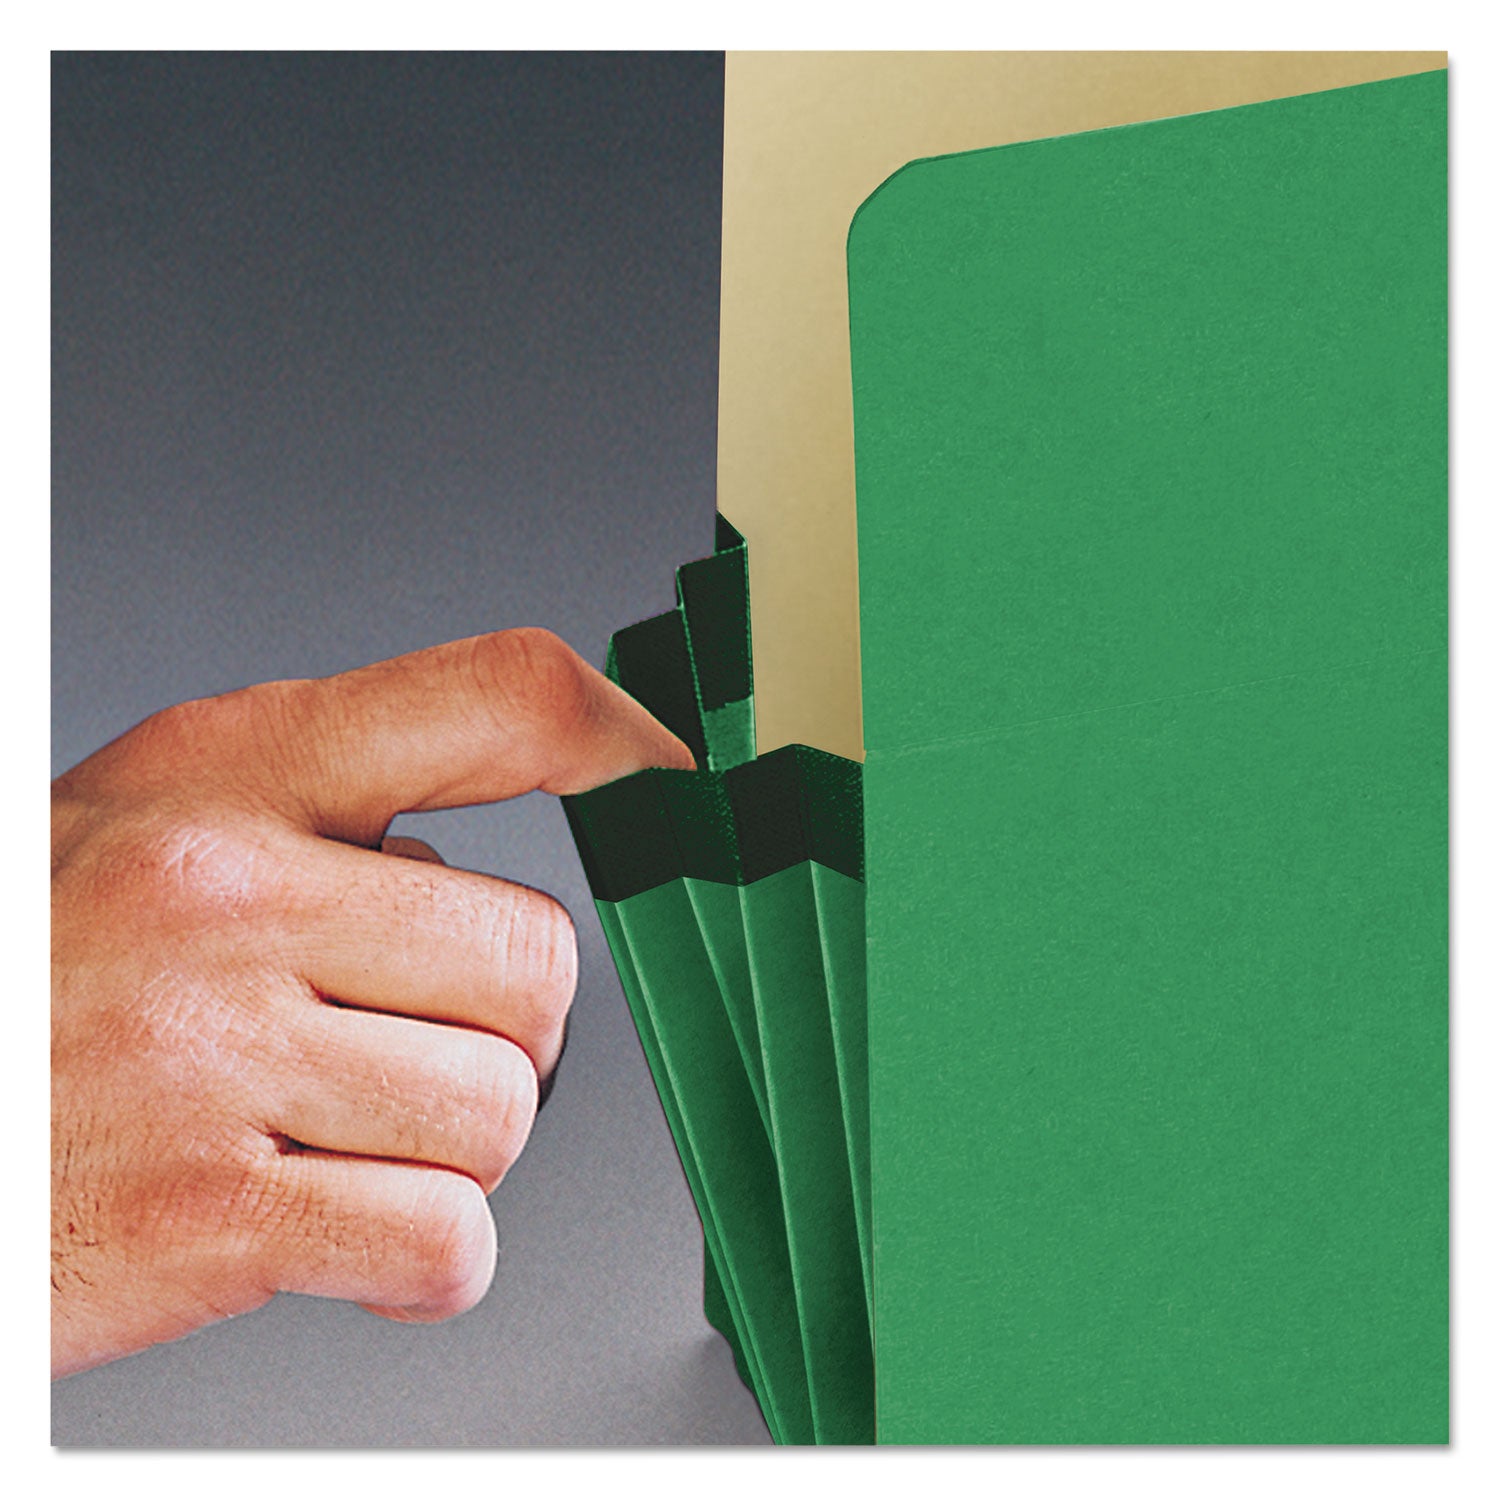 Colored File Pockets, 3.5" Expansion, Legal Size, Green - 